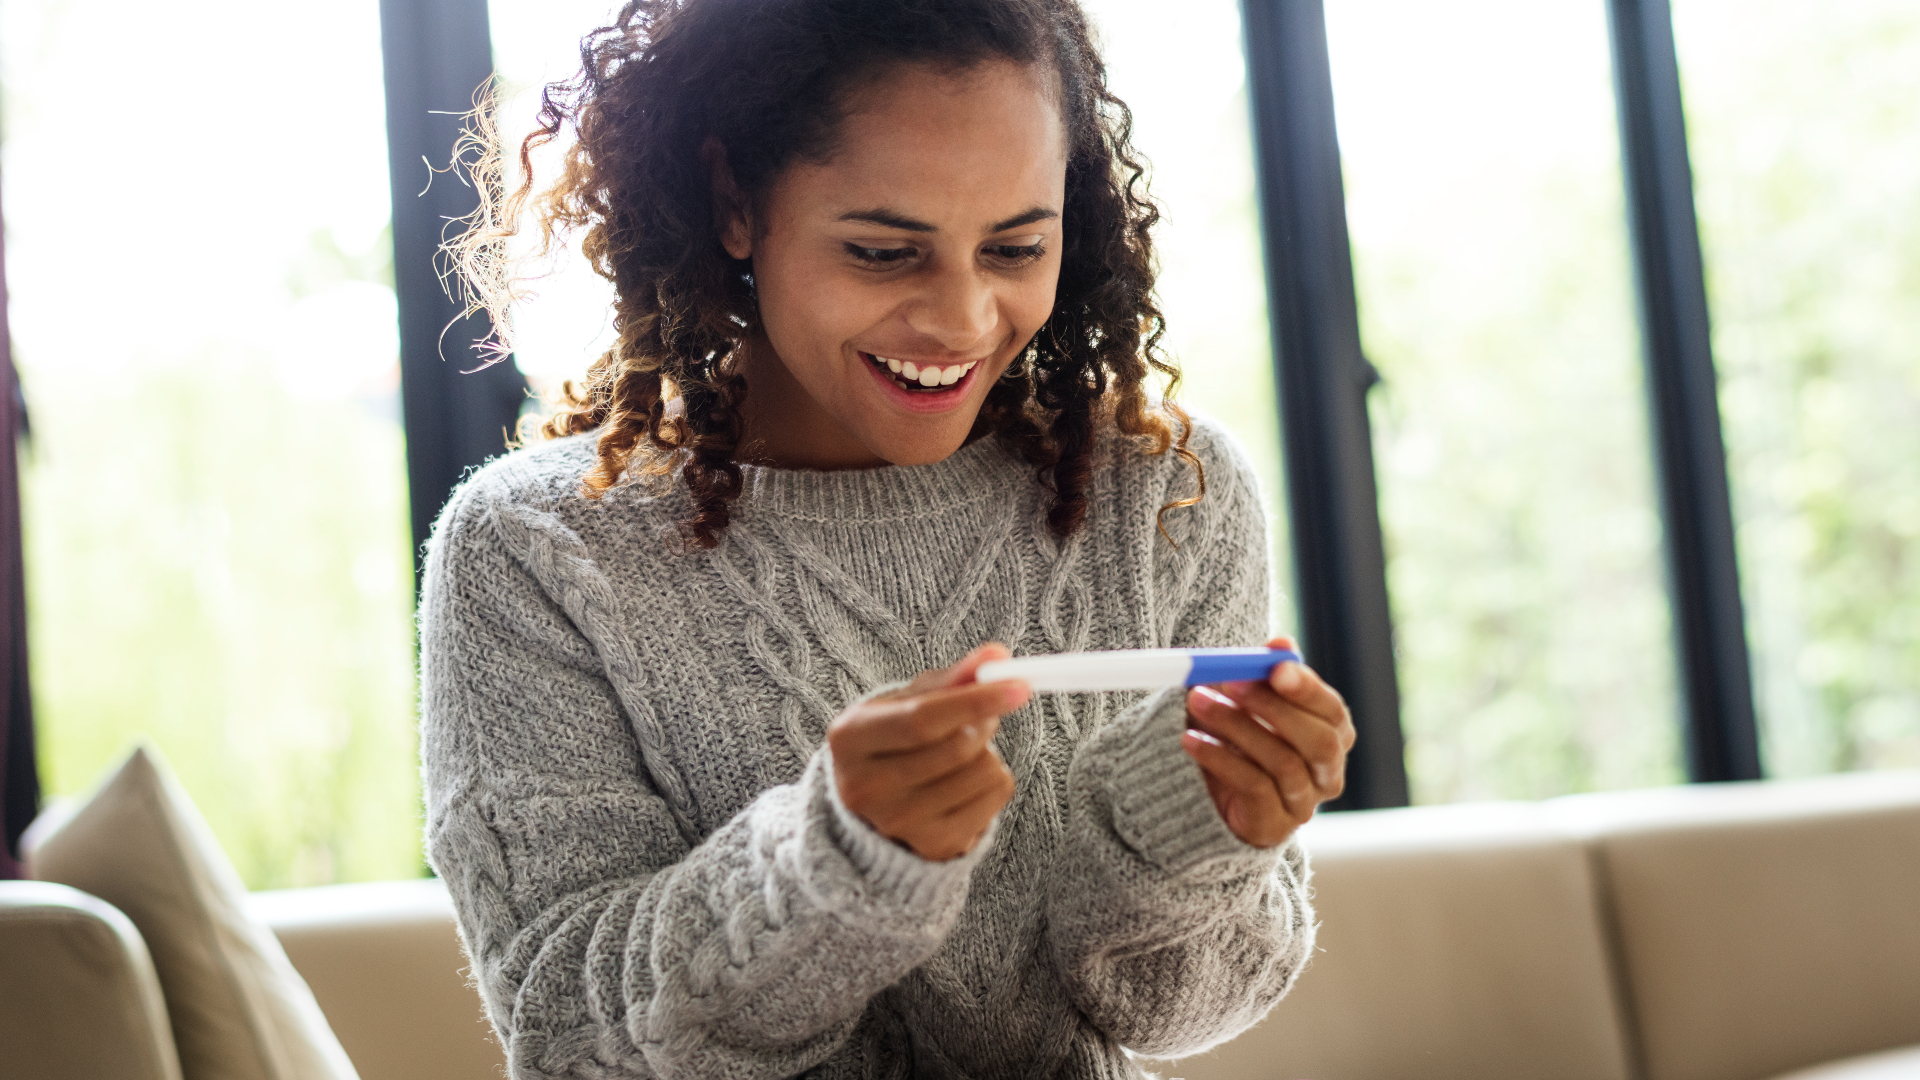 How to get pregnant: Tips and facts to increase fertility